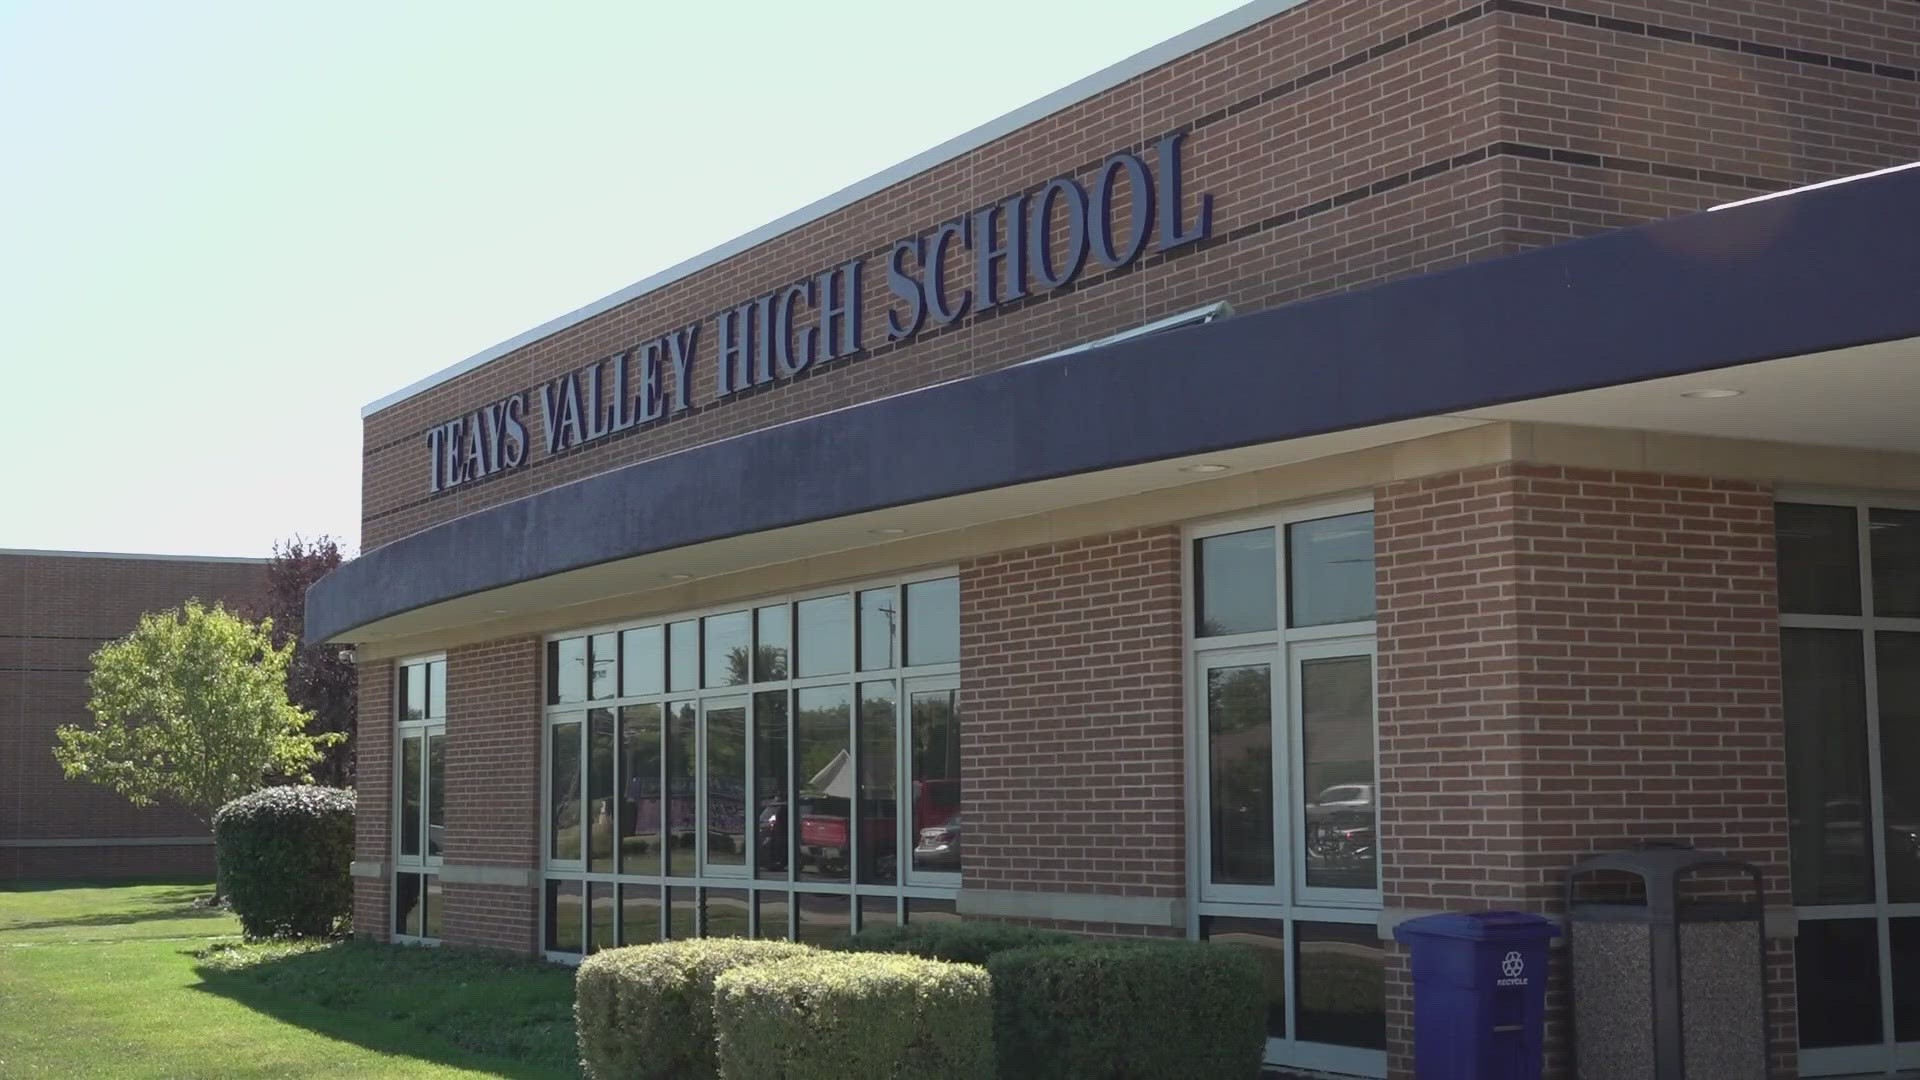 Teay’s Valley High School has 1,300 students. It’s a small school, and when someone is in need they step up to help each other.